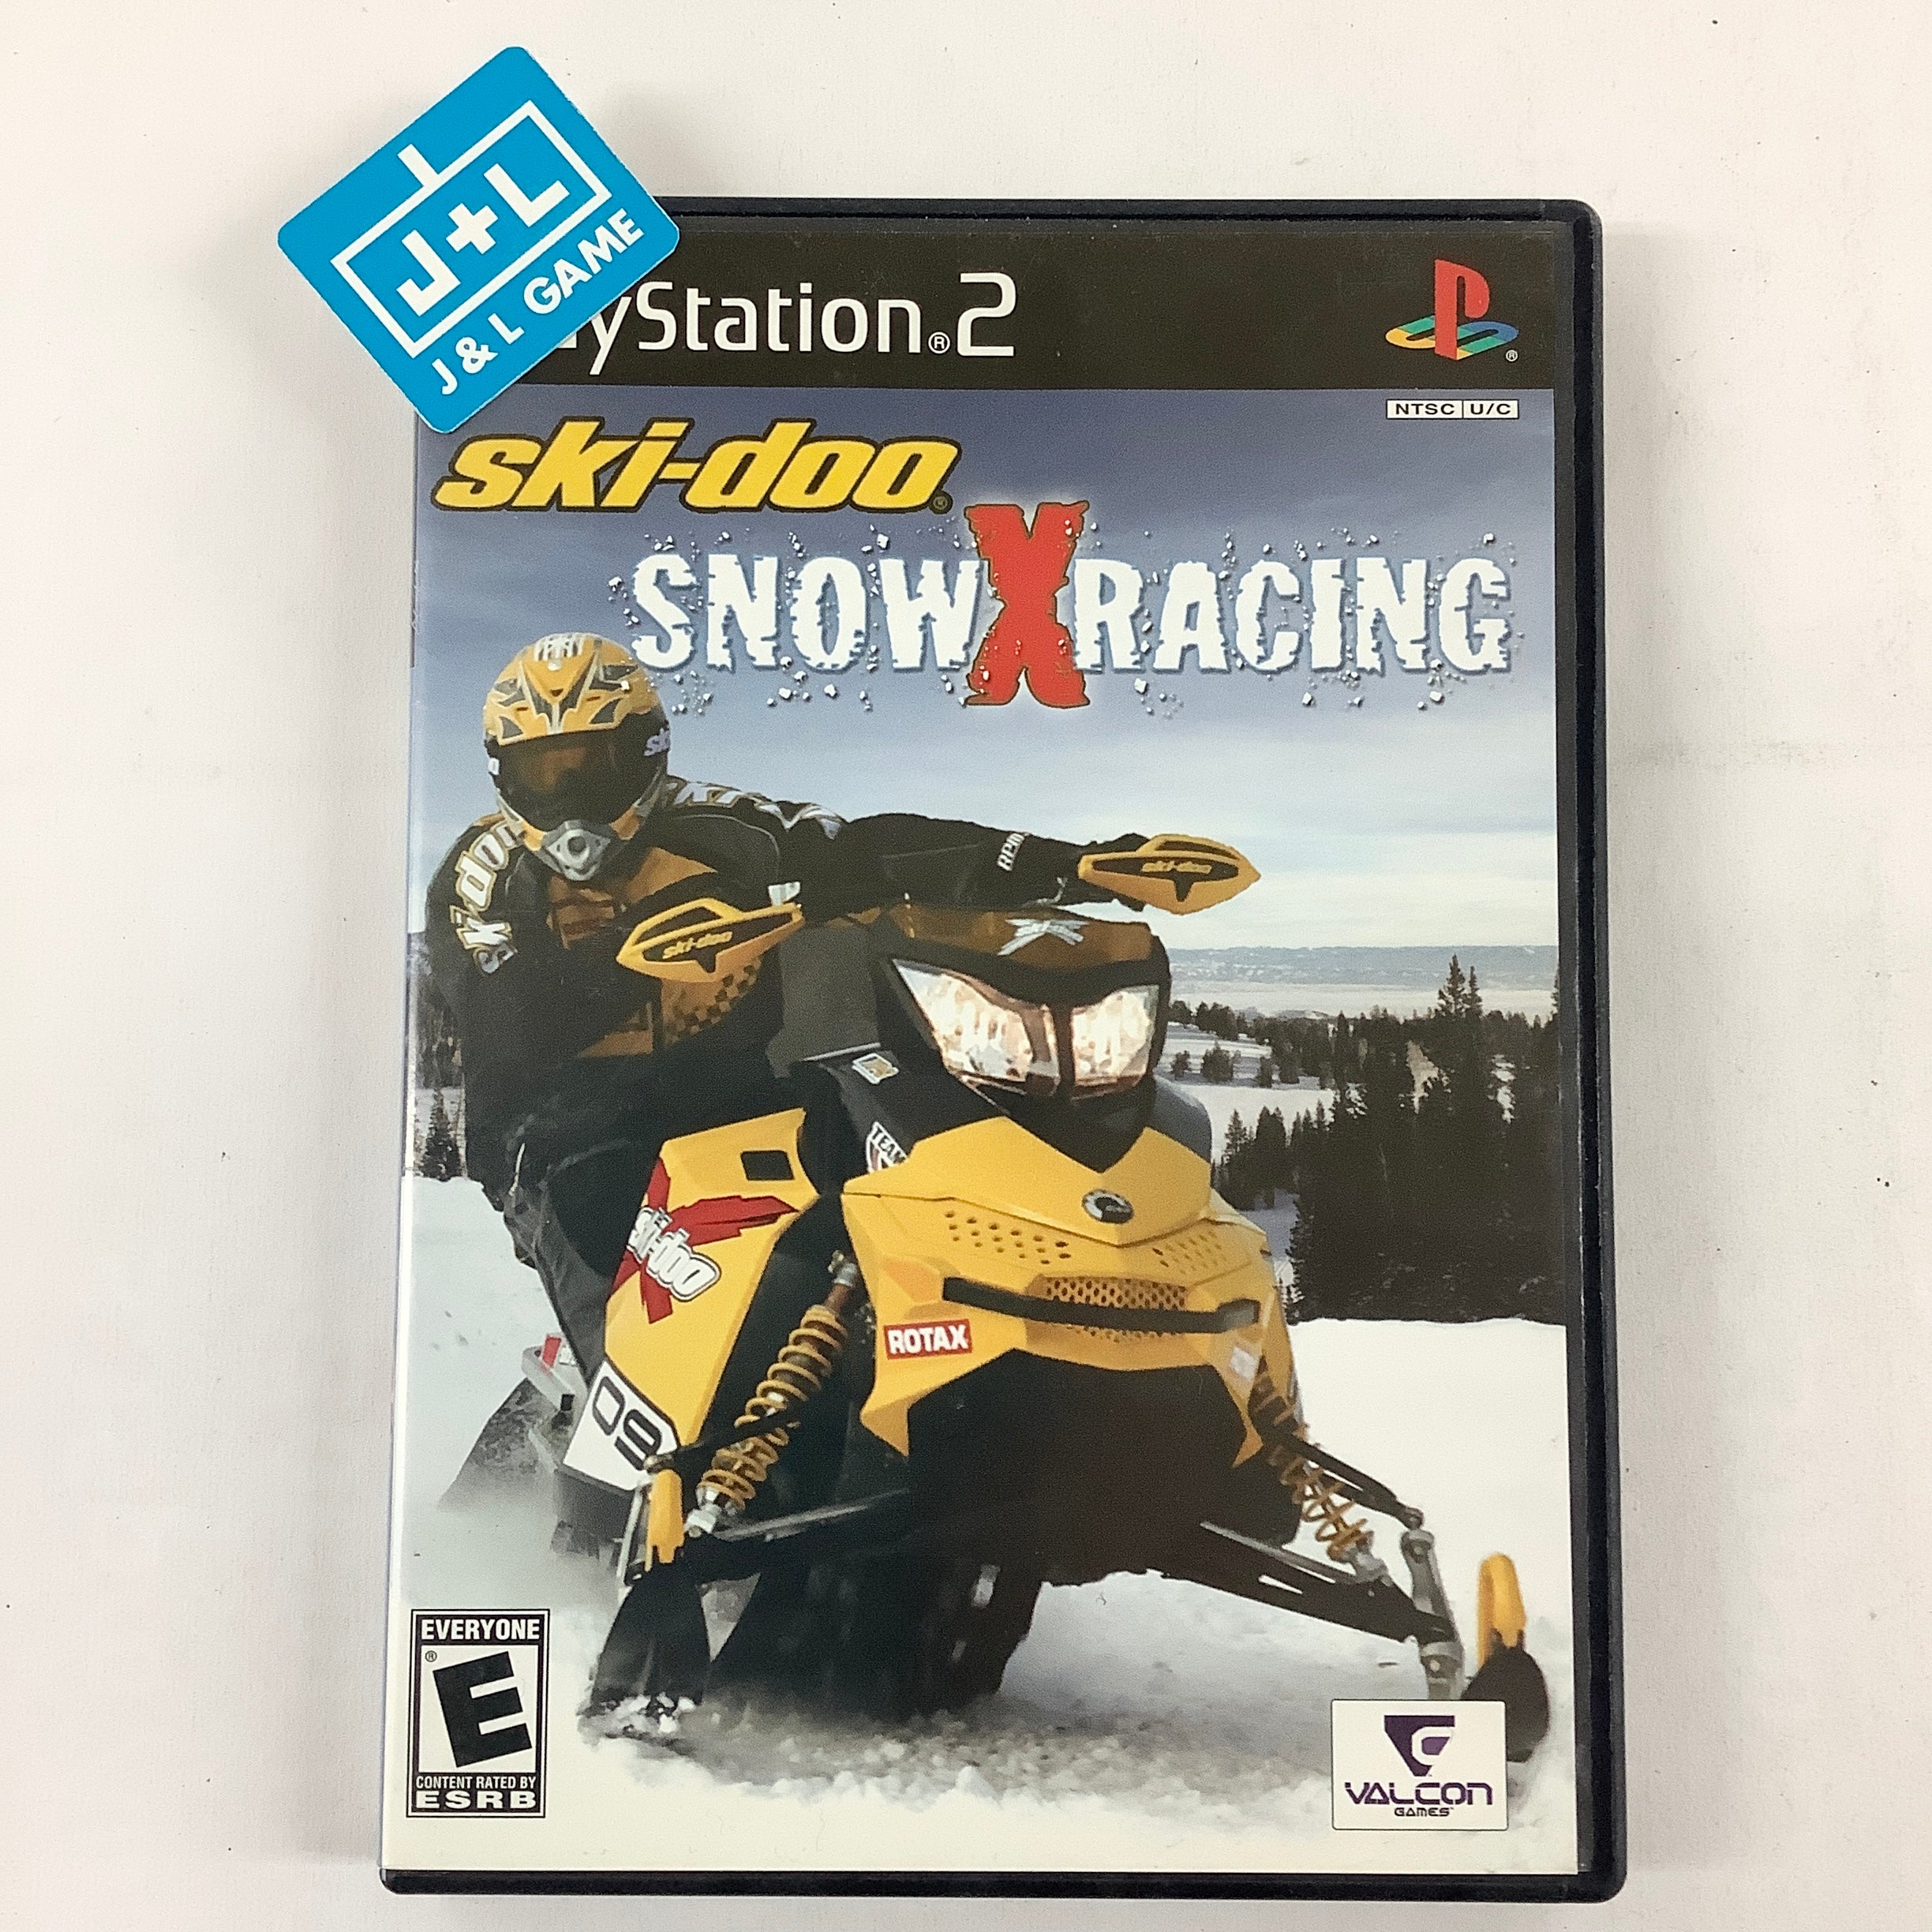 Ski-doo Snow X Racing - (PS2) PlayStation 2 [Pre-Owned]